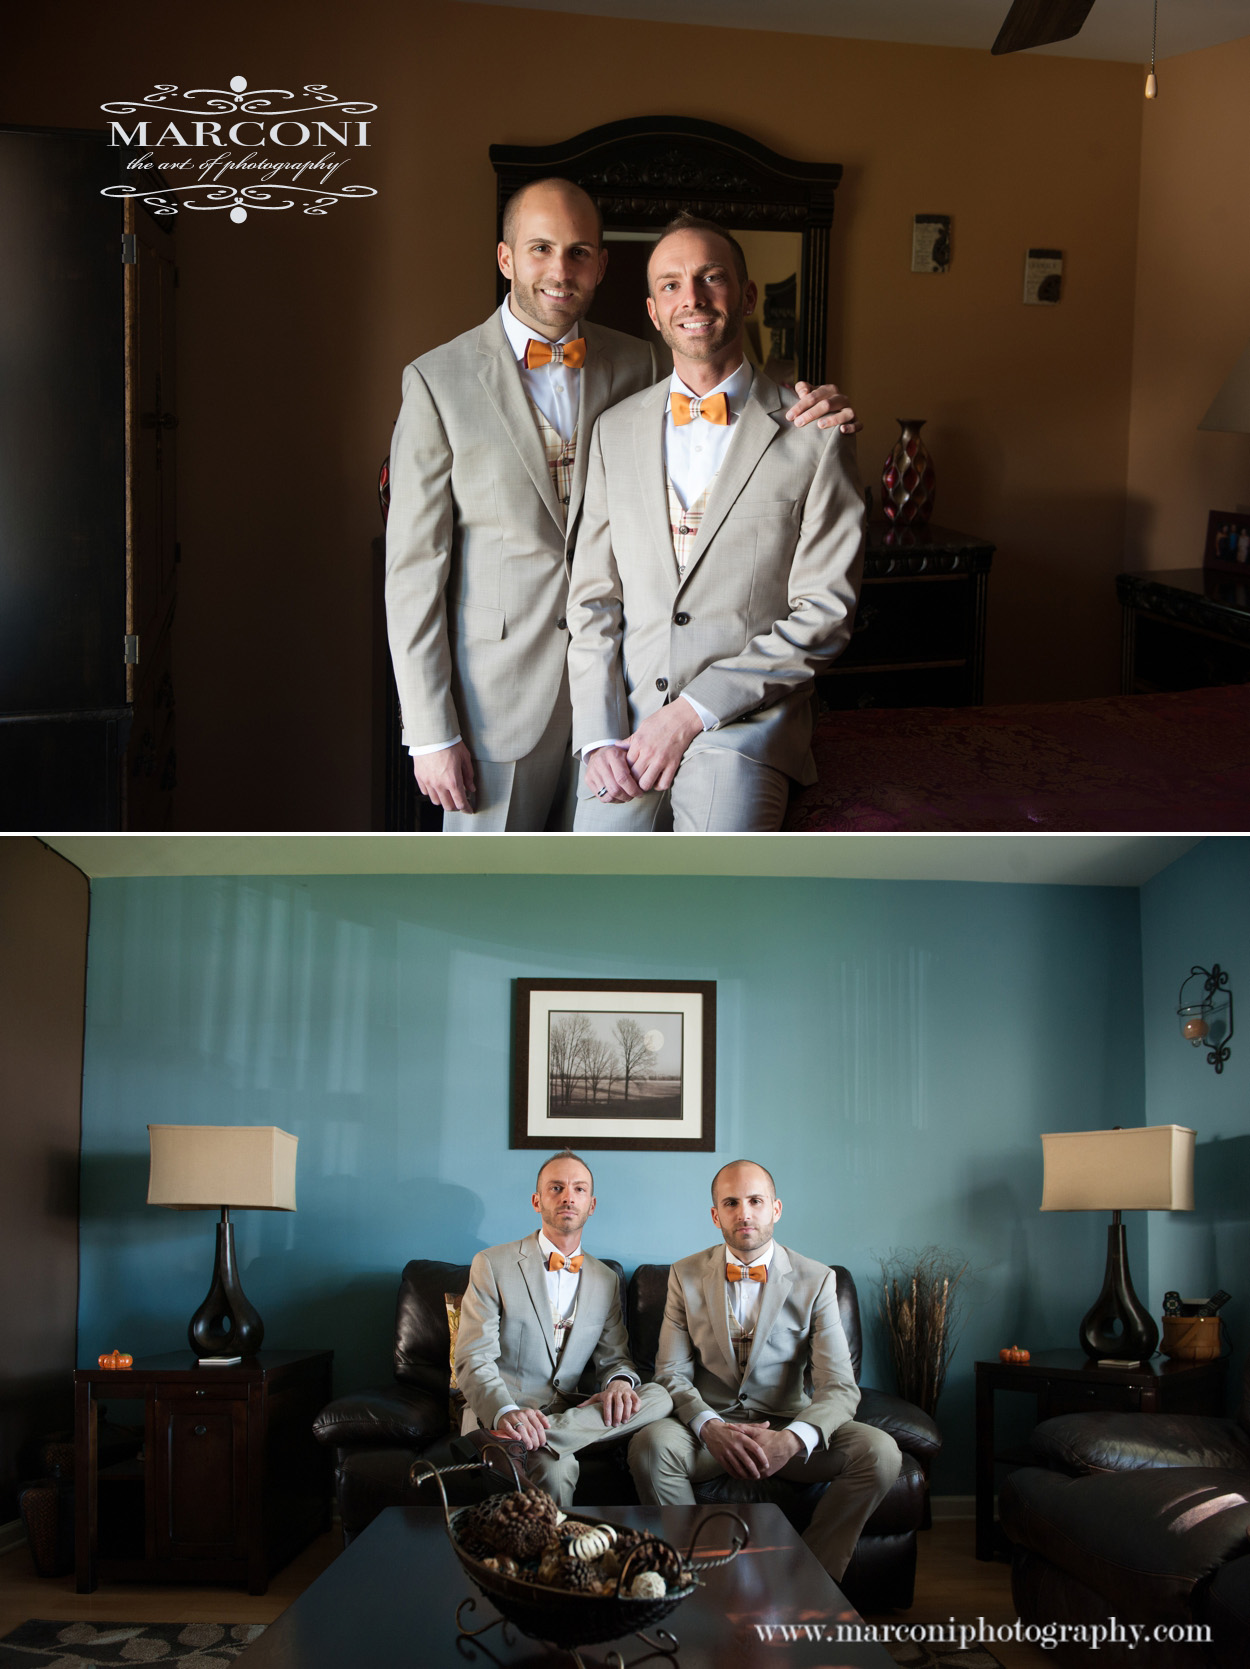 Gay new jersey wedding, Two Grooms! A Gay New Jersey Wedding. And a Happy one!